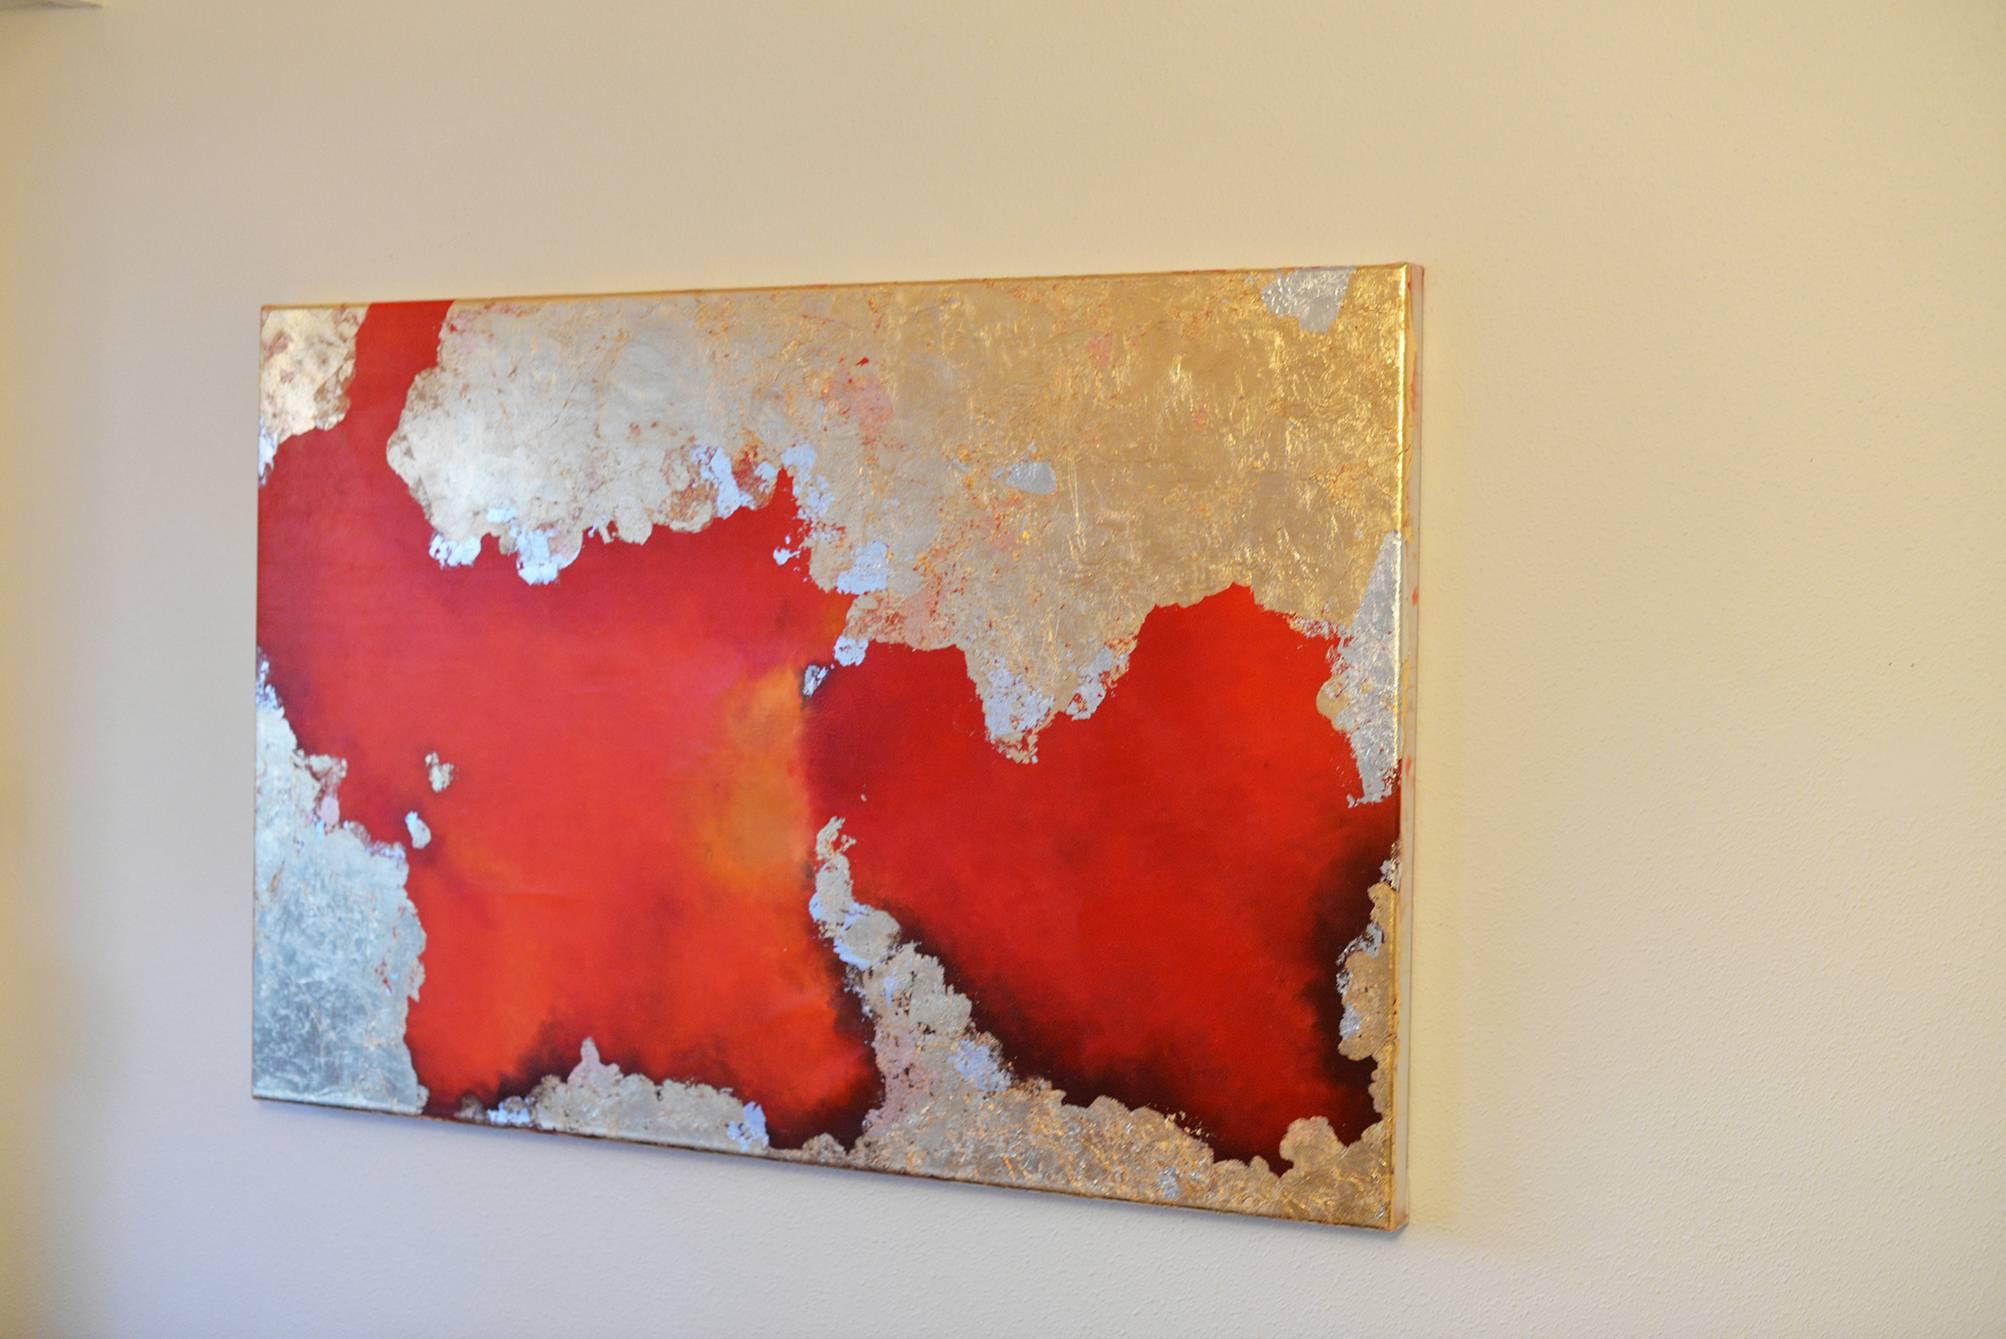 Hic Sunt Leones - Gold Abstract Painting by KC PAILLARD